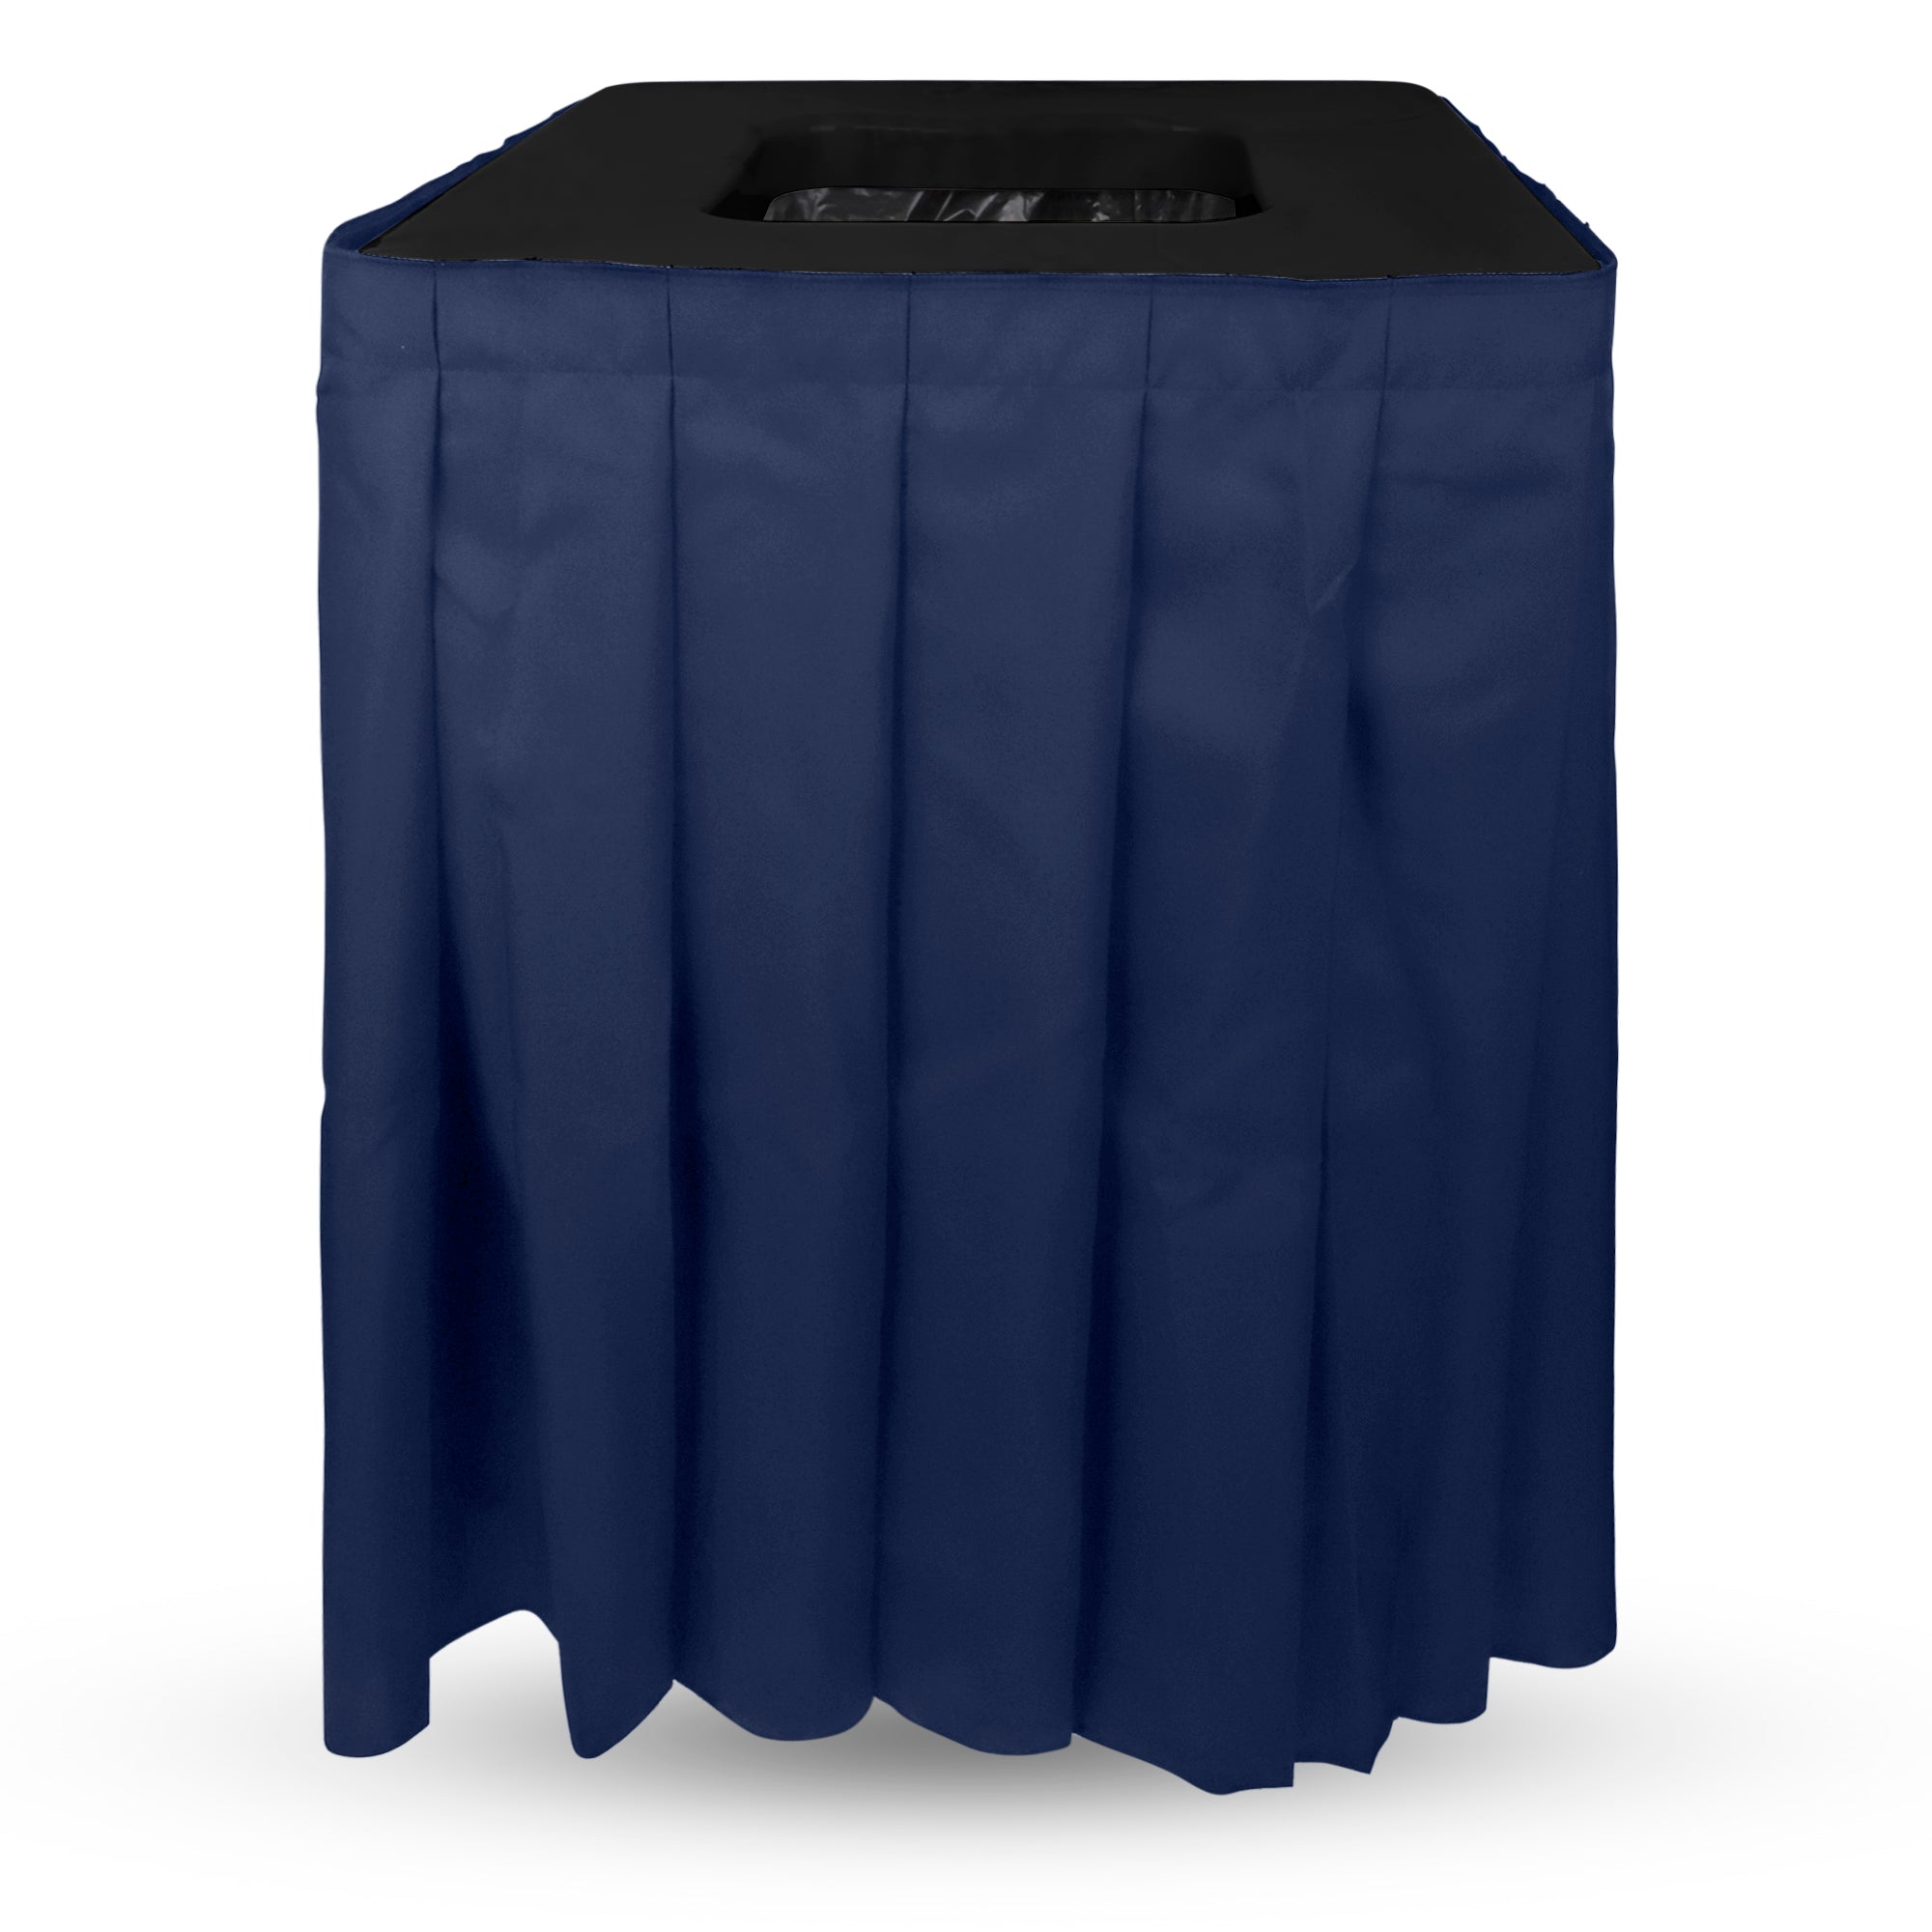 Square Black Garbage Can Cover - Solid Pleated Skirt Topper for 32-35 Gallon Indoor Garbage Cans Trash Bins, Waste Container Without Wheels - Ideal for Birthday Party, Events, Residential Use